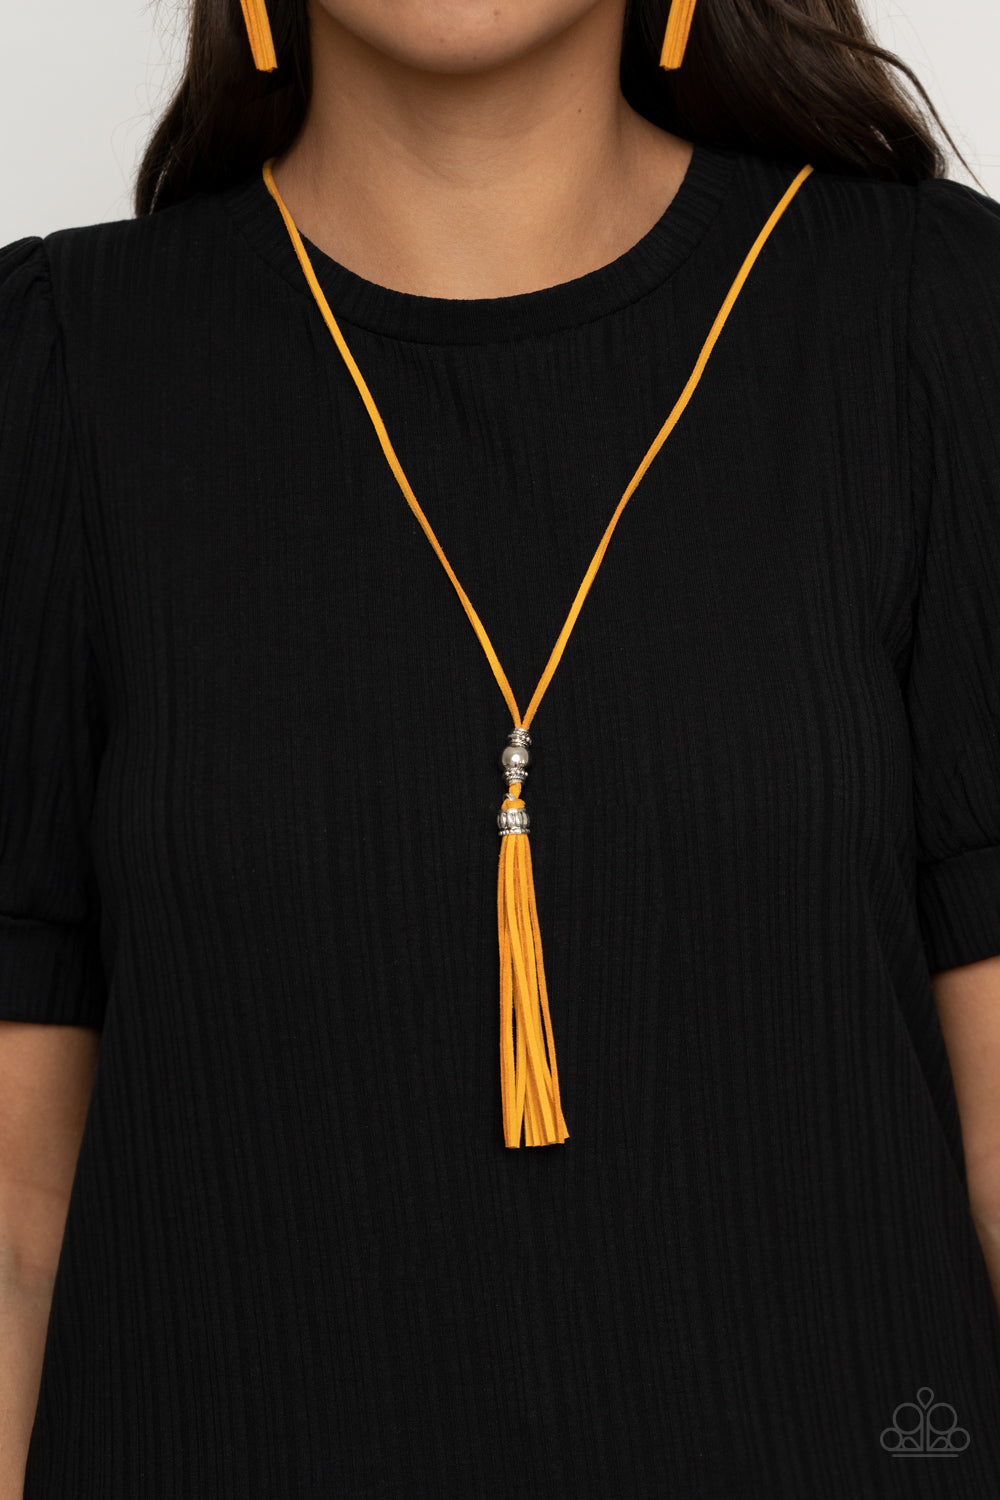 Hold My Tassel - yellow - Paparazzi necklace